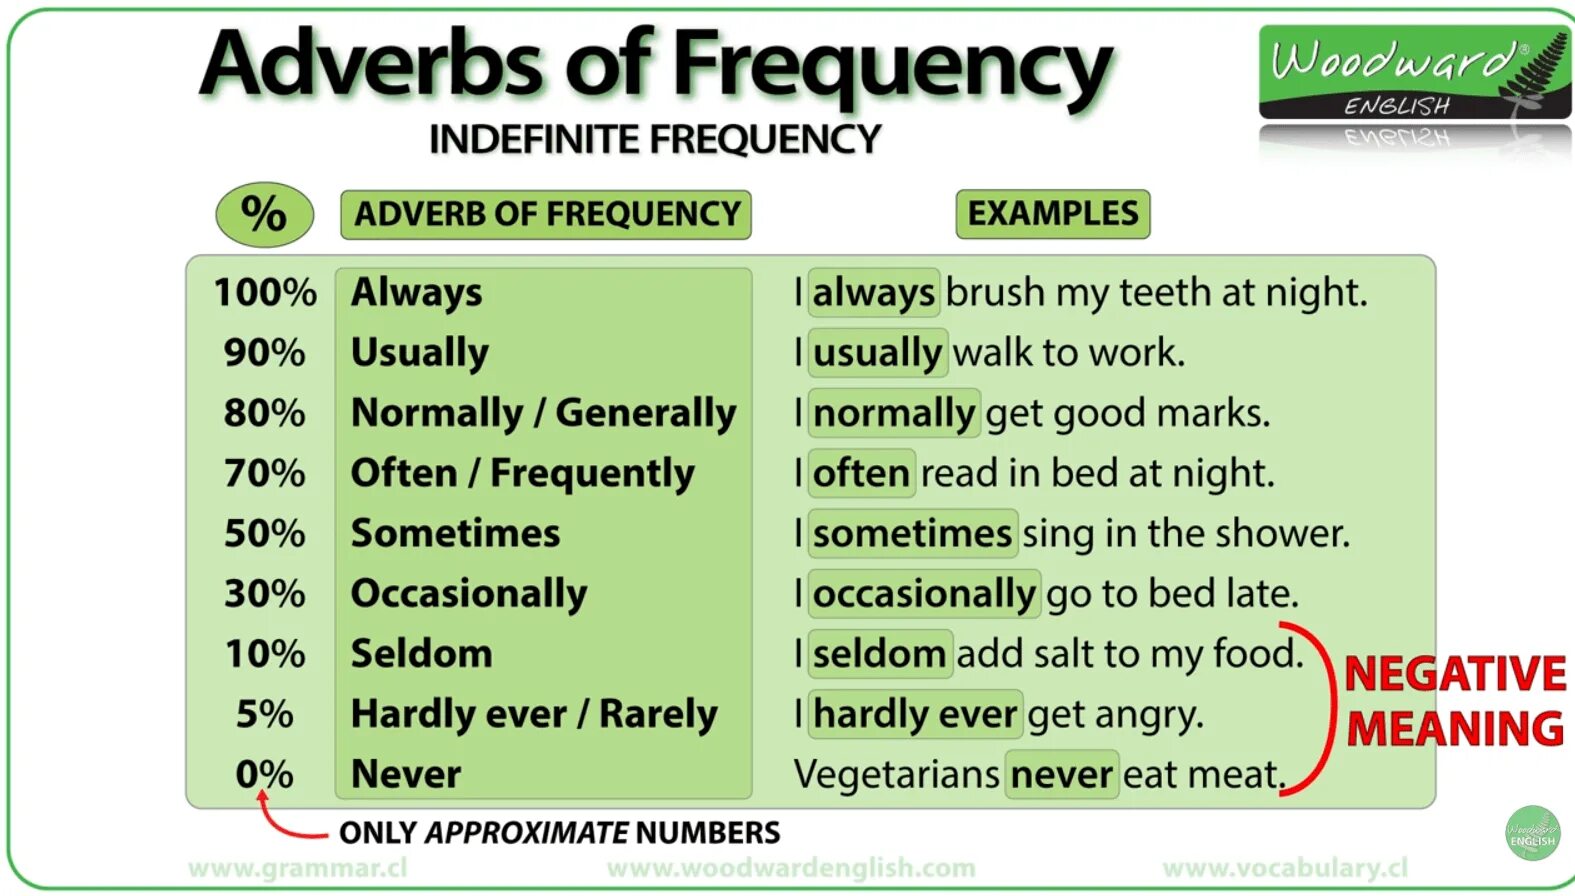 Adverbs of Frequency. Adverbs of Frequency in English. Adverbs and expressions of Frequency правило. Frequency adverbs грамматика. Present simple adverbs